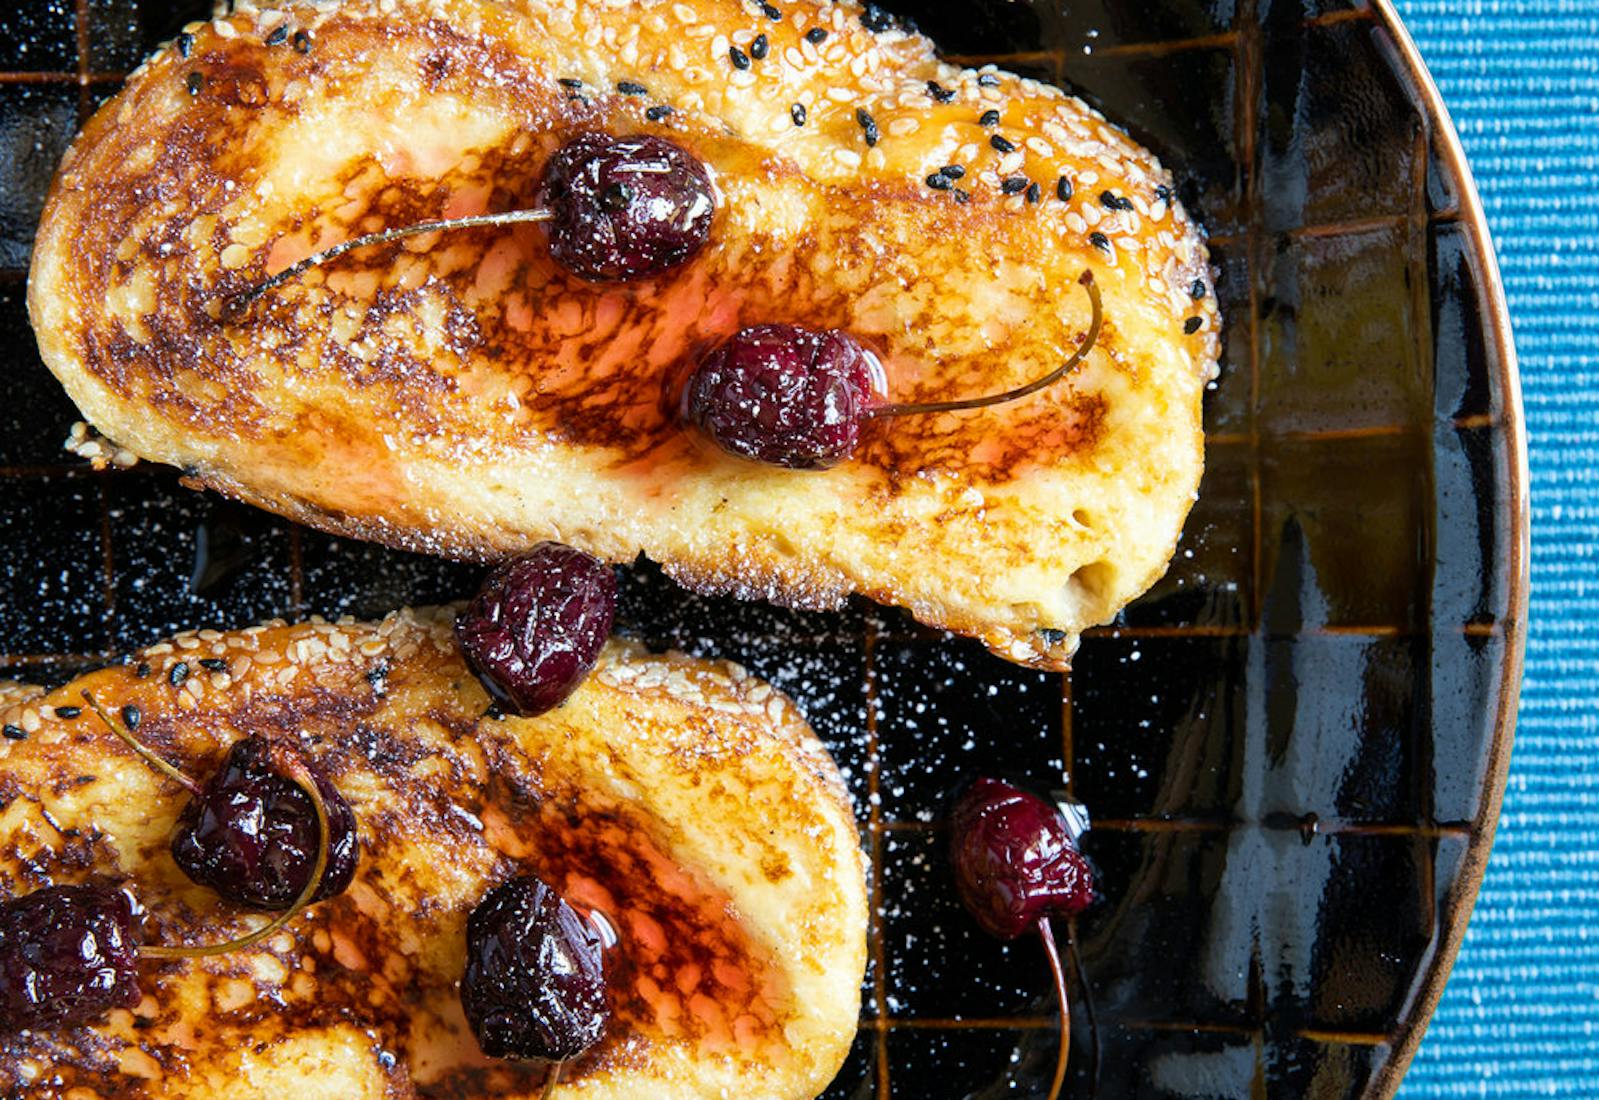 Honey challah with macerated cherries, syrup and powdered sugar on black plate atop blue tablecloth.